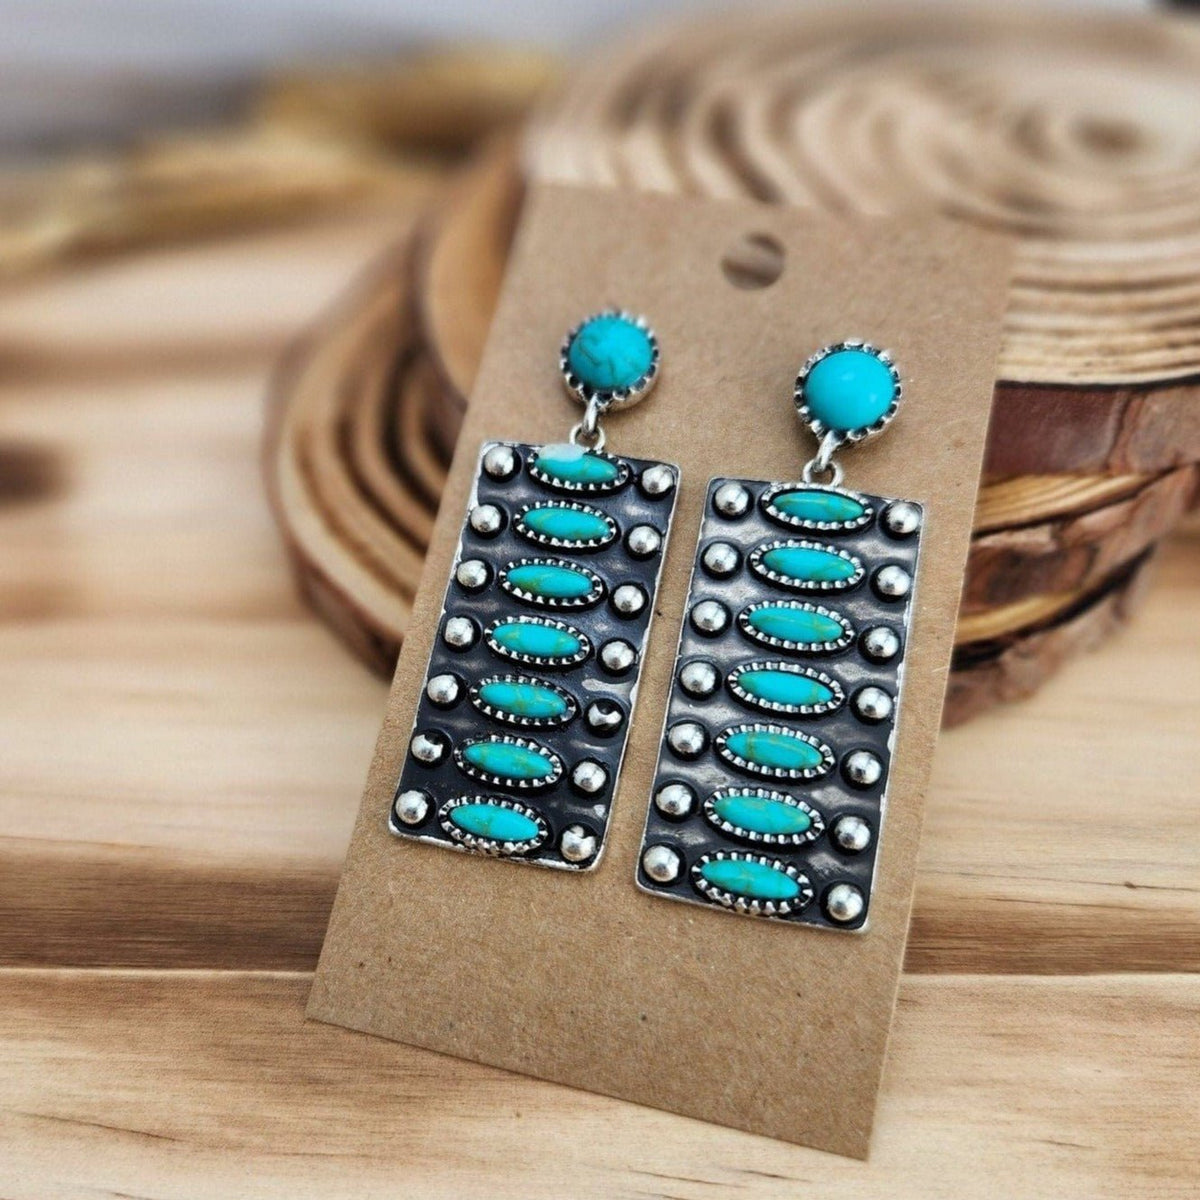 Aces Wild - Western Gunmetal and Turquoise Earrings TheFringeCultureCollective